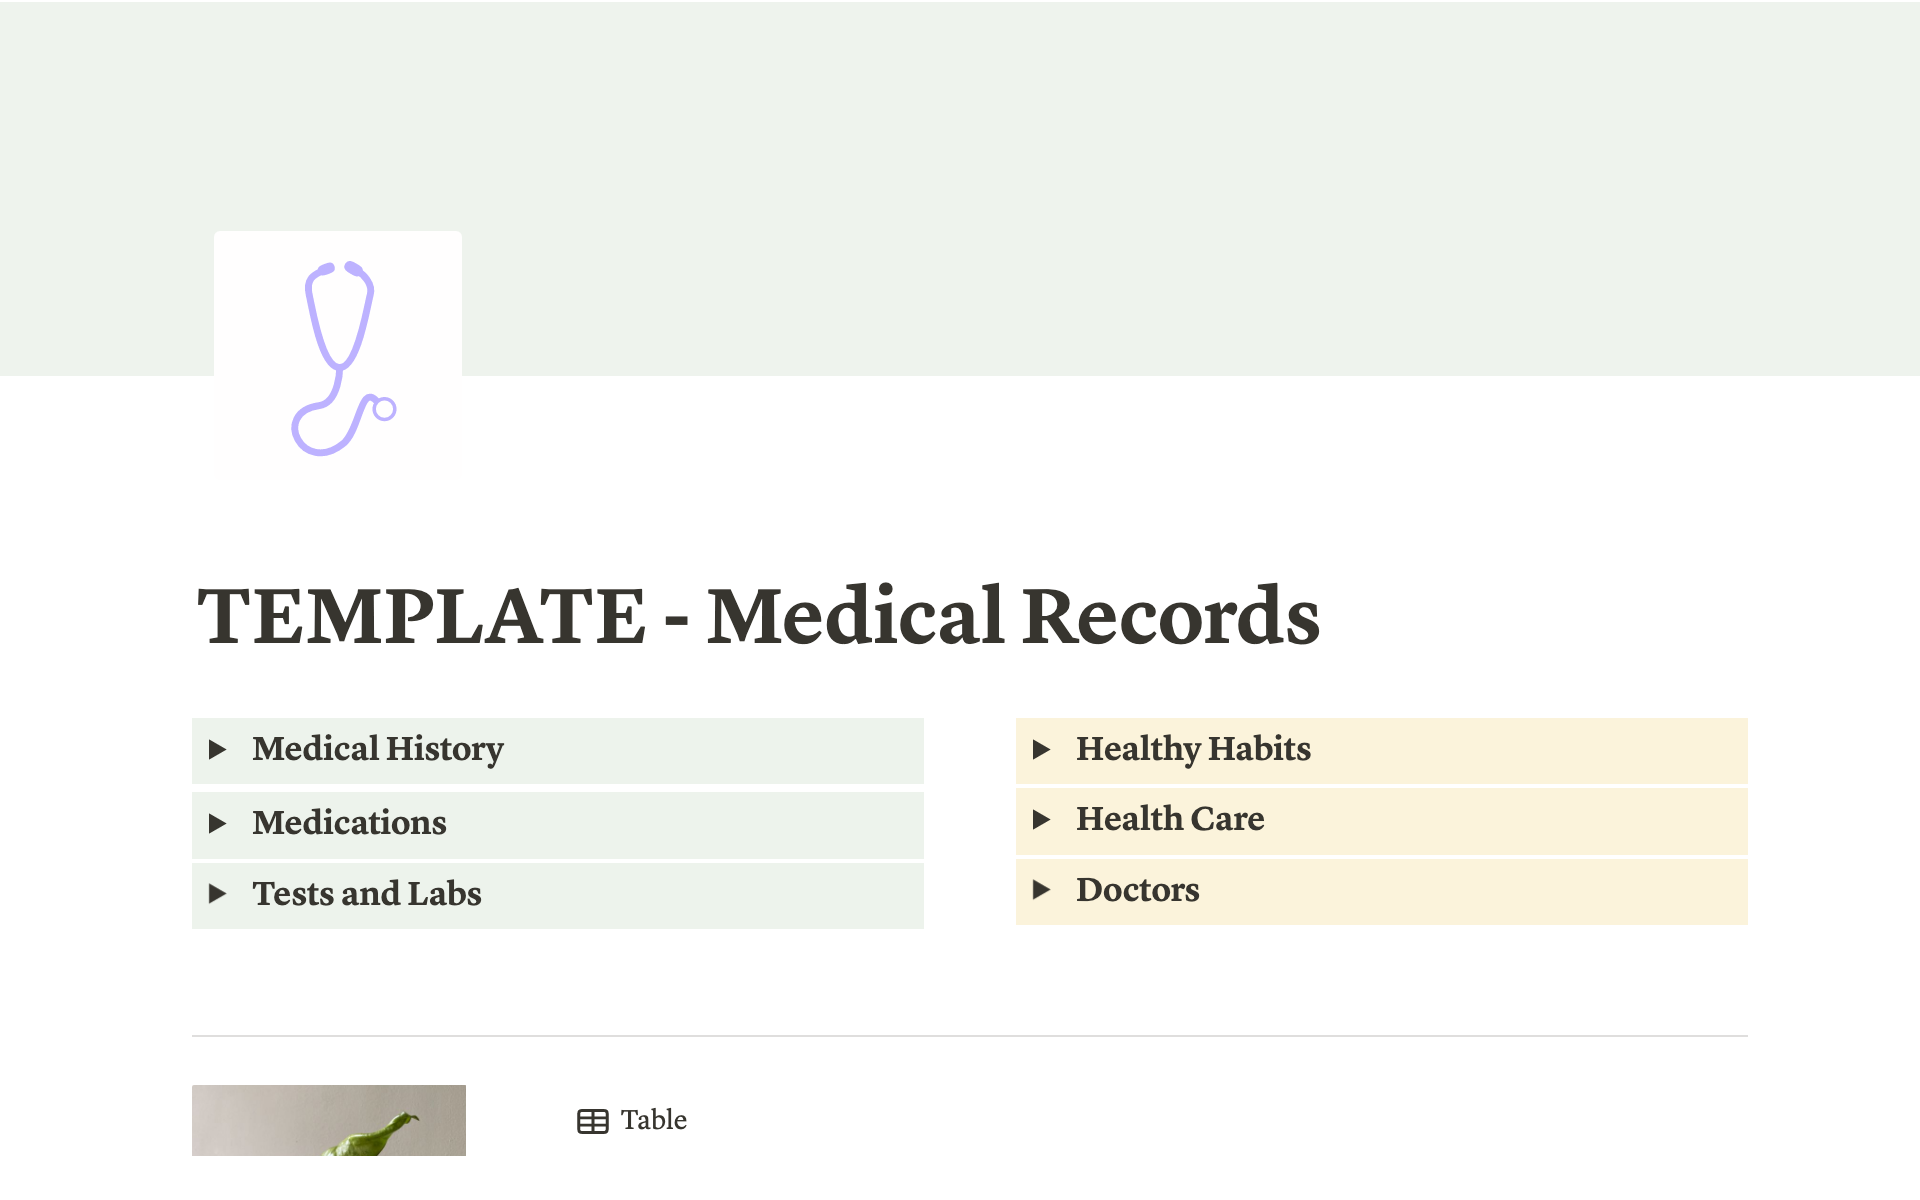 Helps keep track of all your medical records, expenses, doctors appointments, and more.